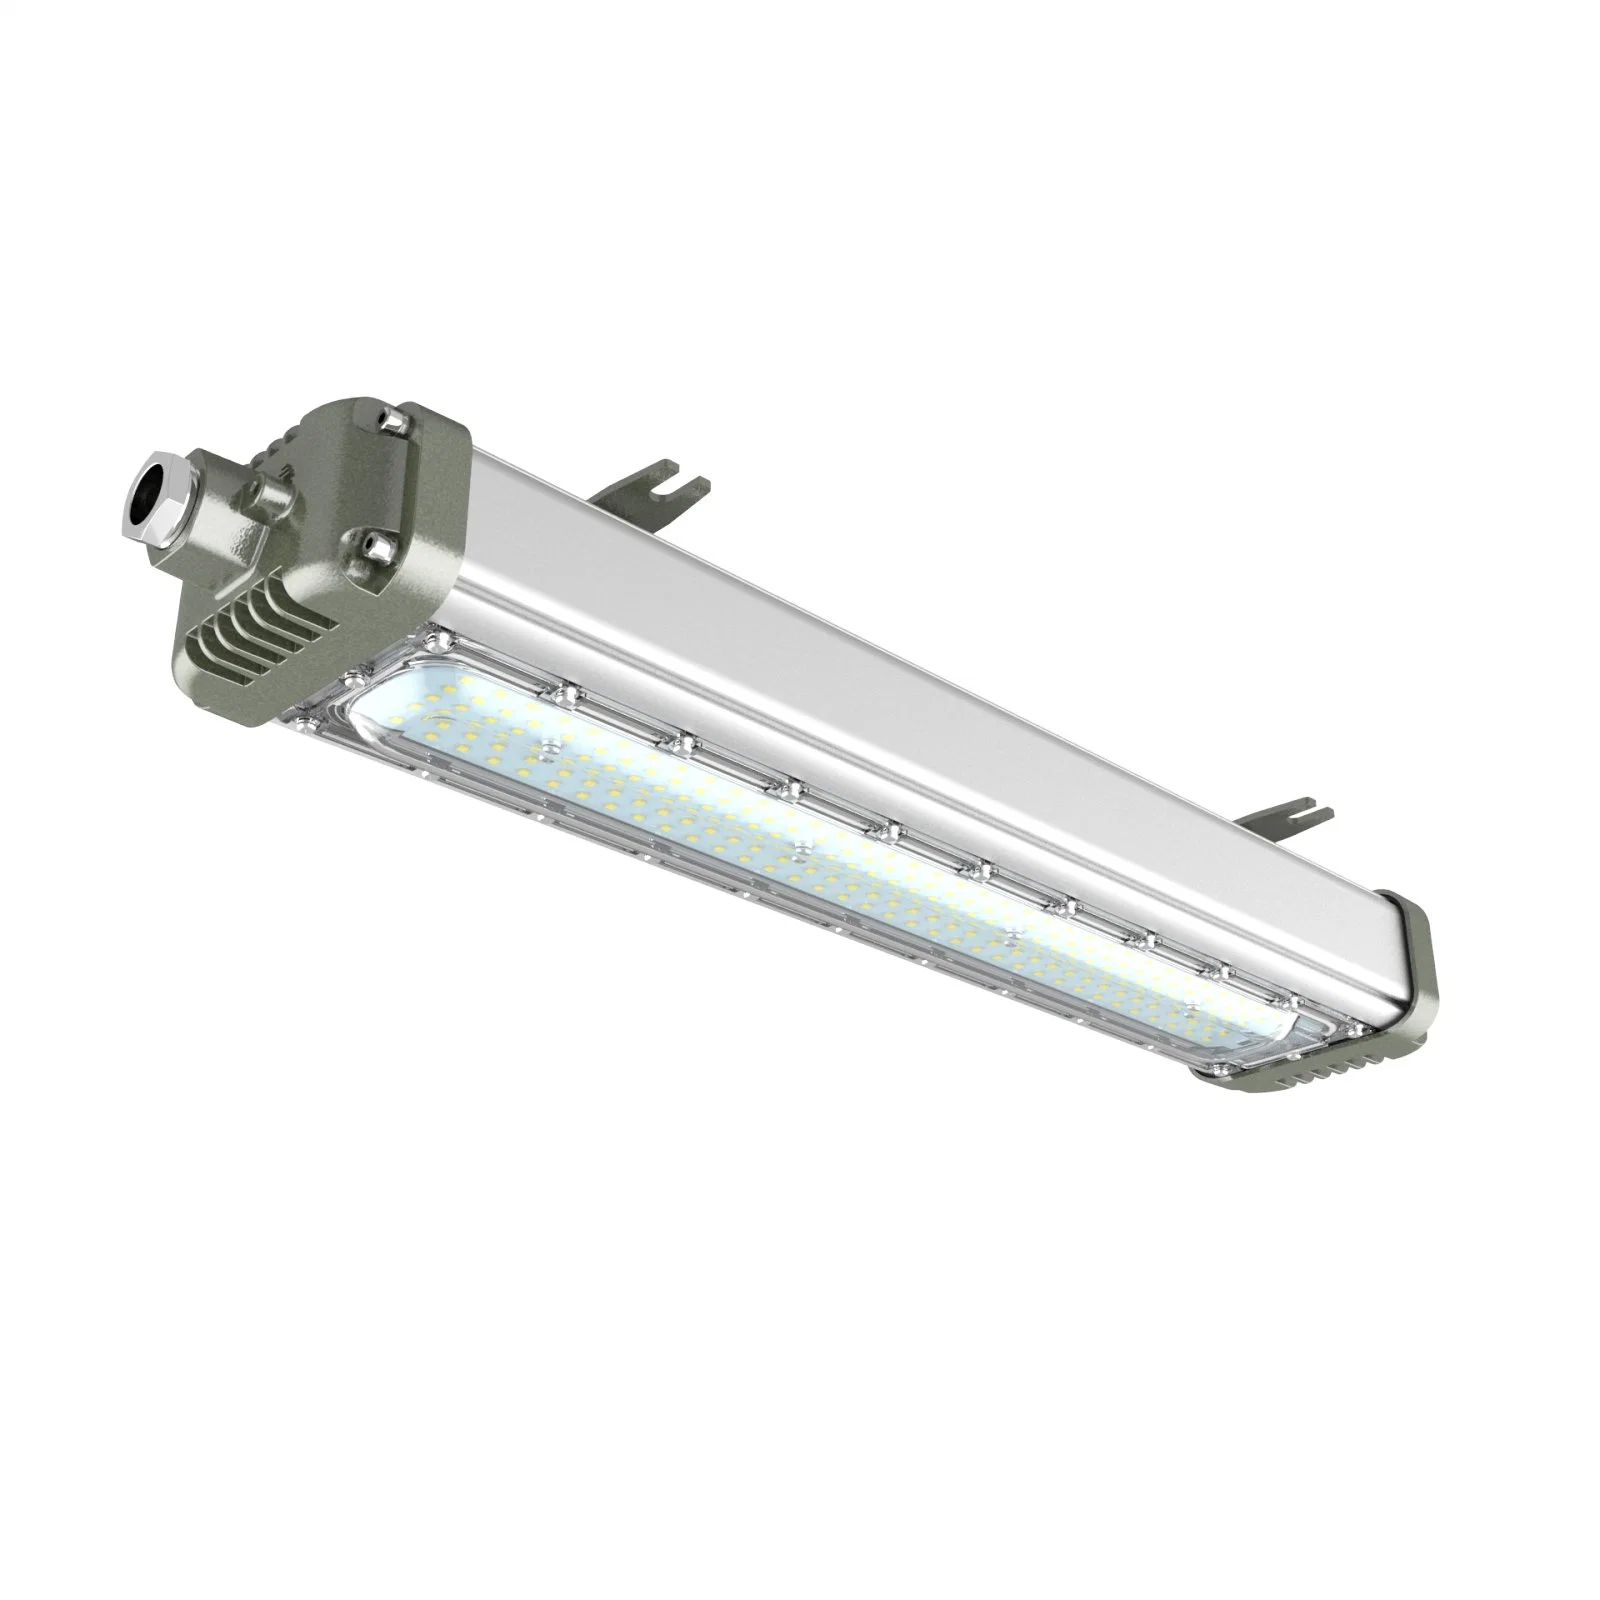 Explosion-Proof LED Lamps Ex Lighting Fixtures Industrial Linear Light